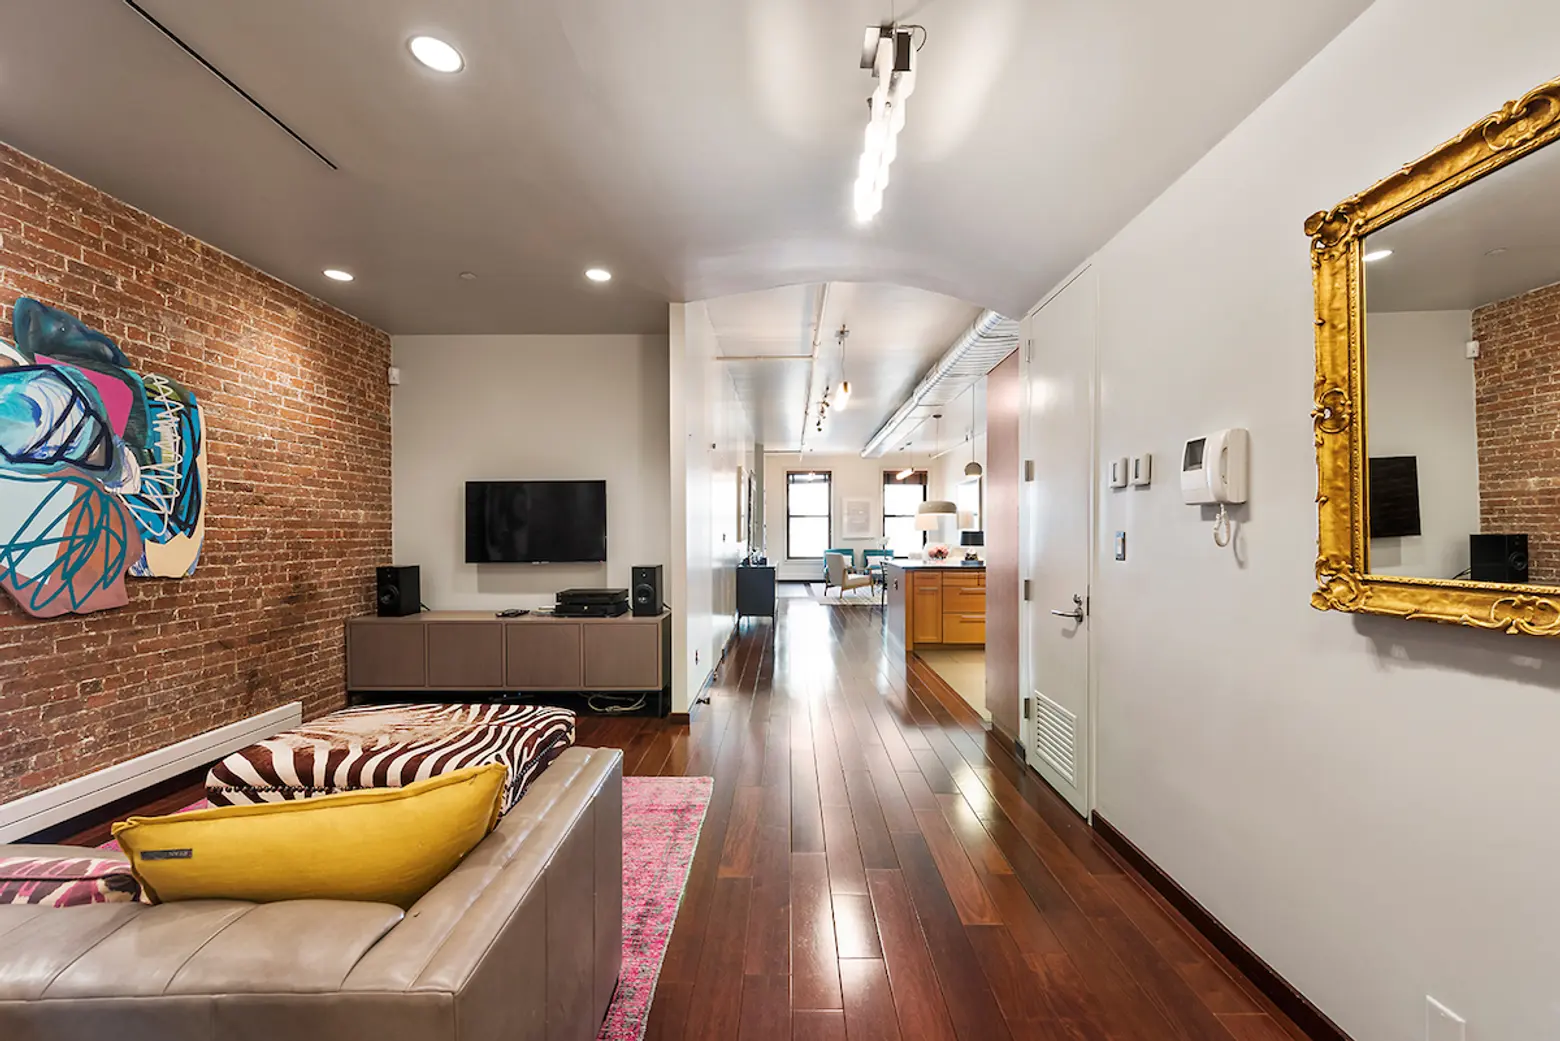 36 North Moore Street, Cool Listings, Tribeca, Lofts, Co-ops for sale, Manhattan lofts for sale